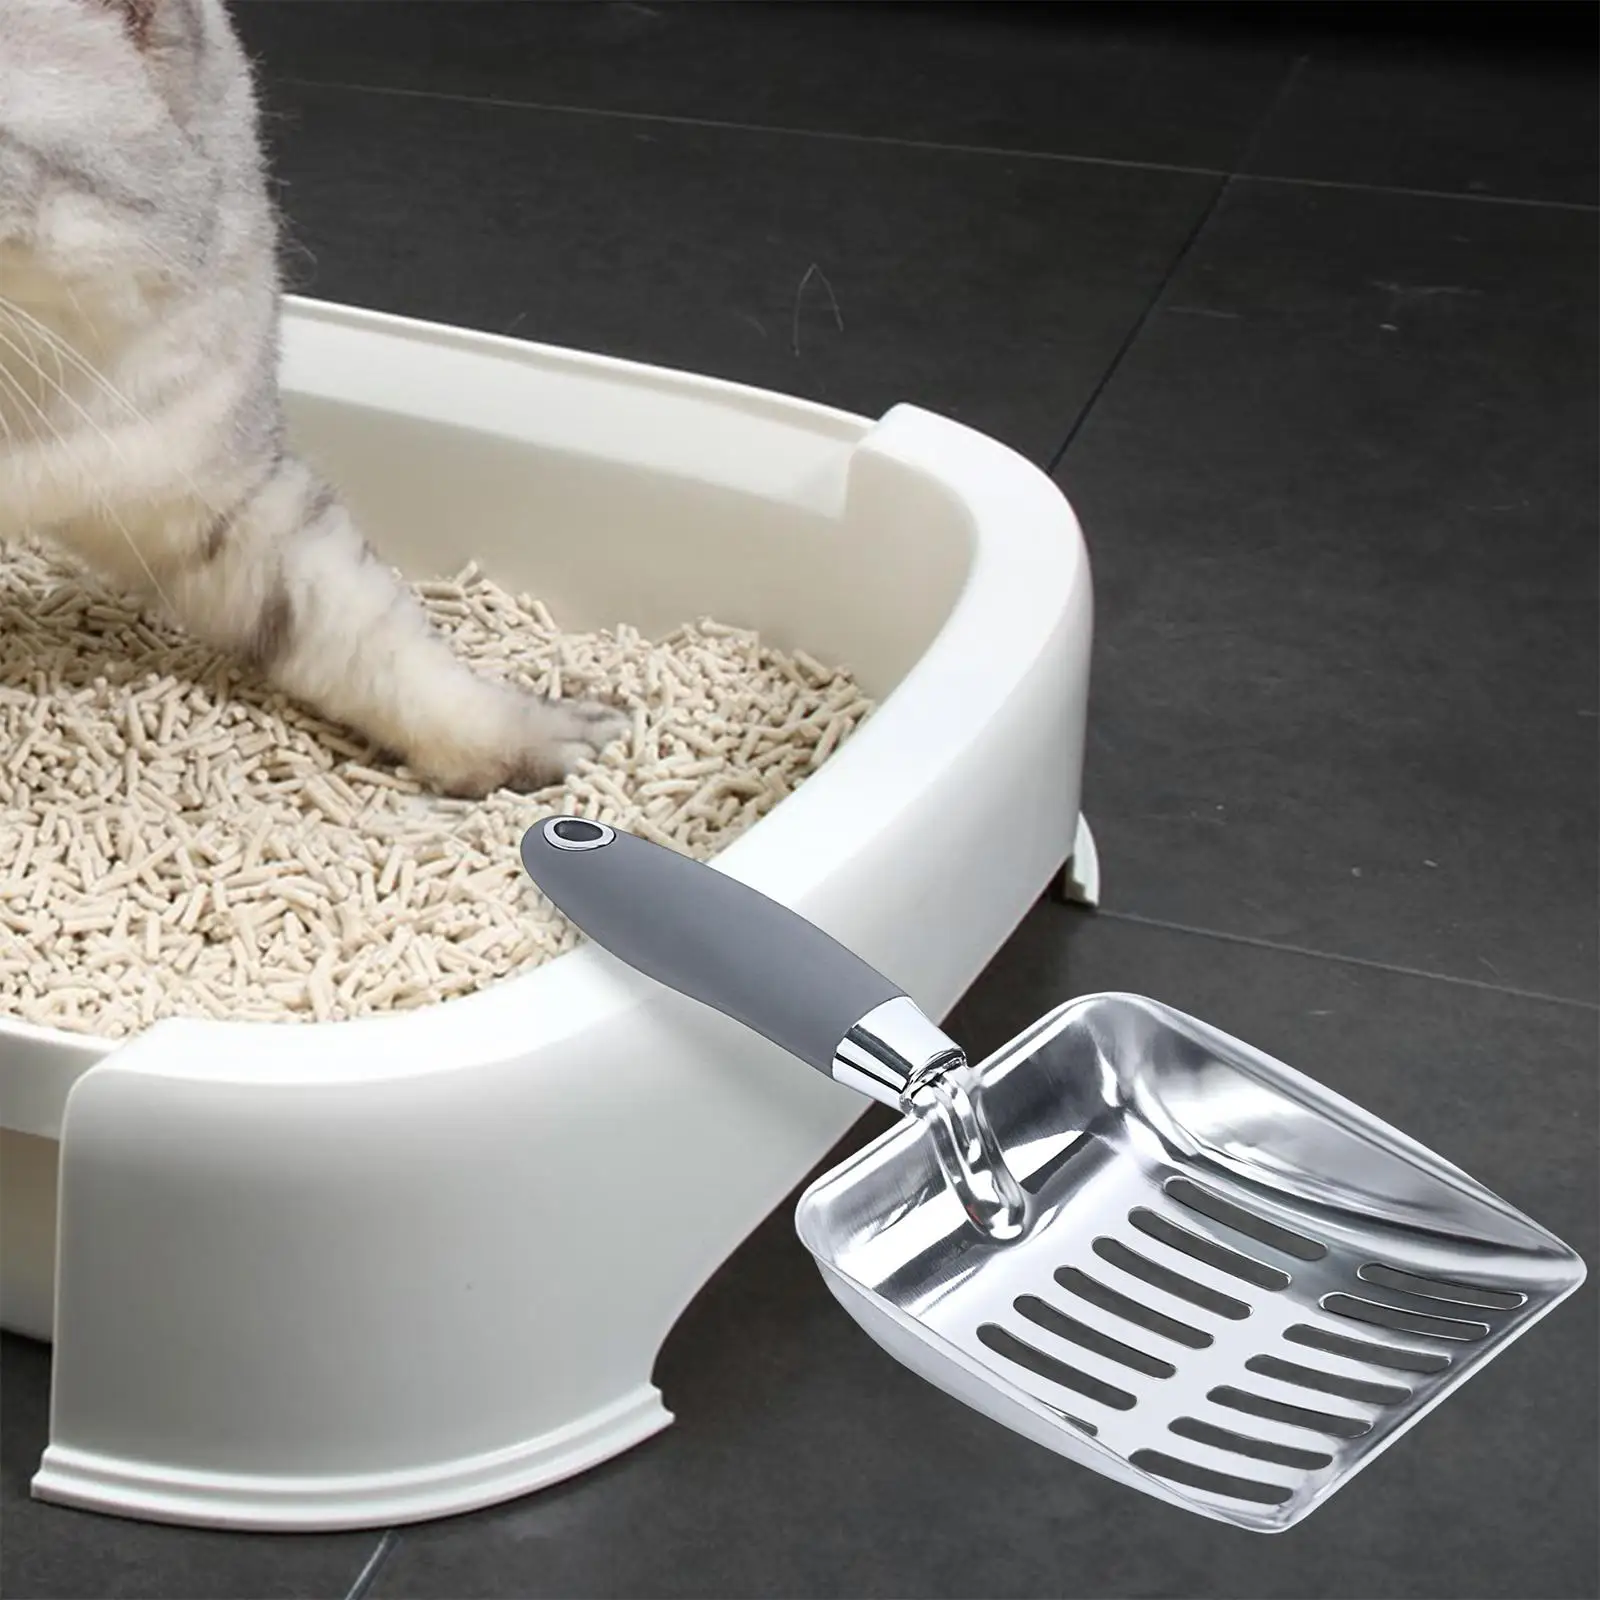 Cat Litter Sifting  Sifting Striped Hollow Out Cleaner Tool Durable Kitty Litter Box Metal Metal er for Kittens Pets Supplies